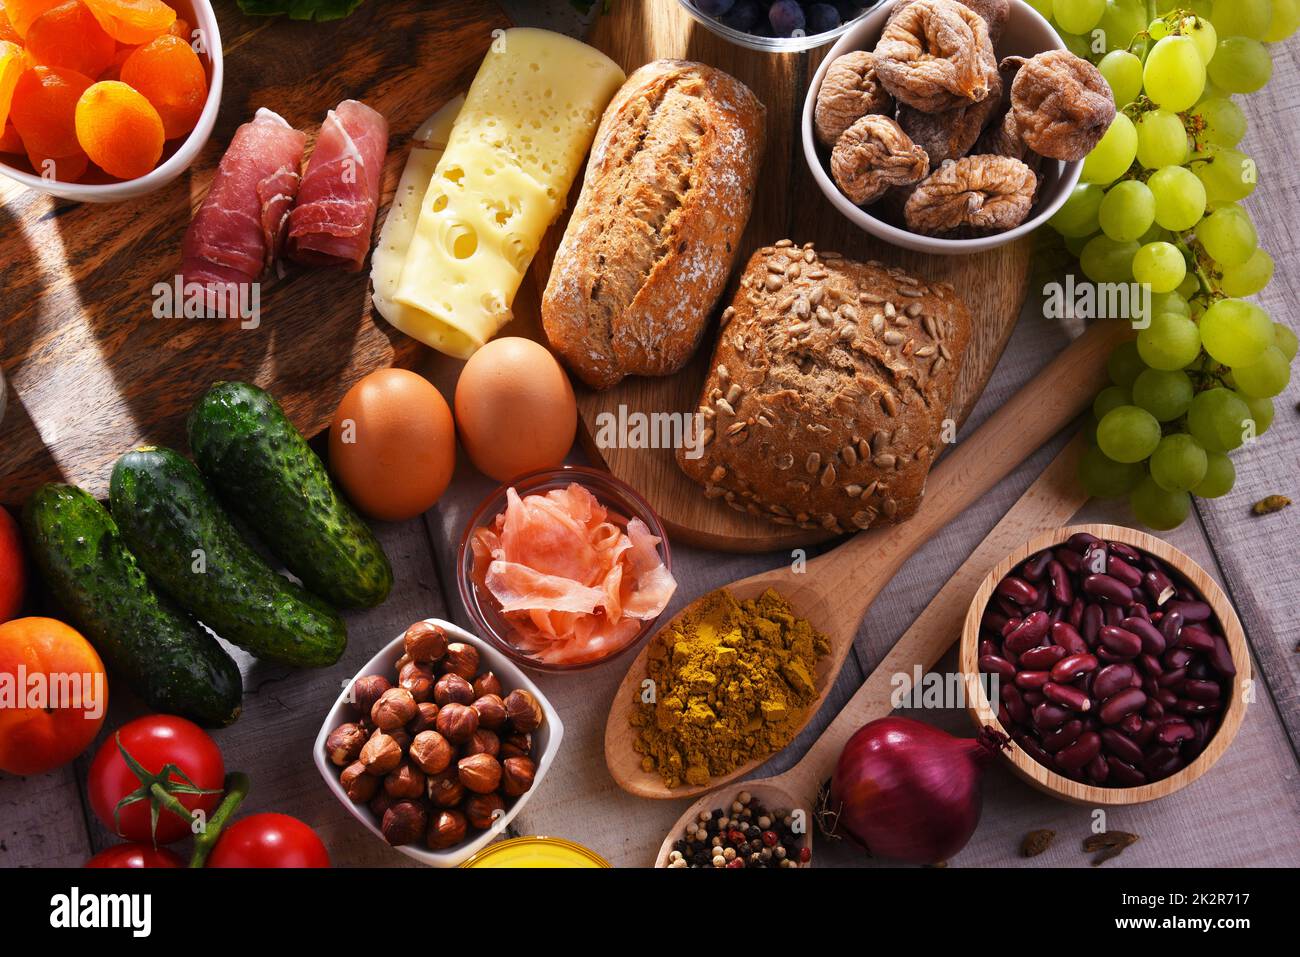 Assorted organic food products on the table Stock Photo